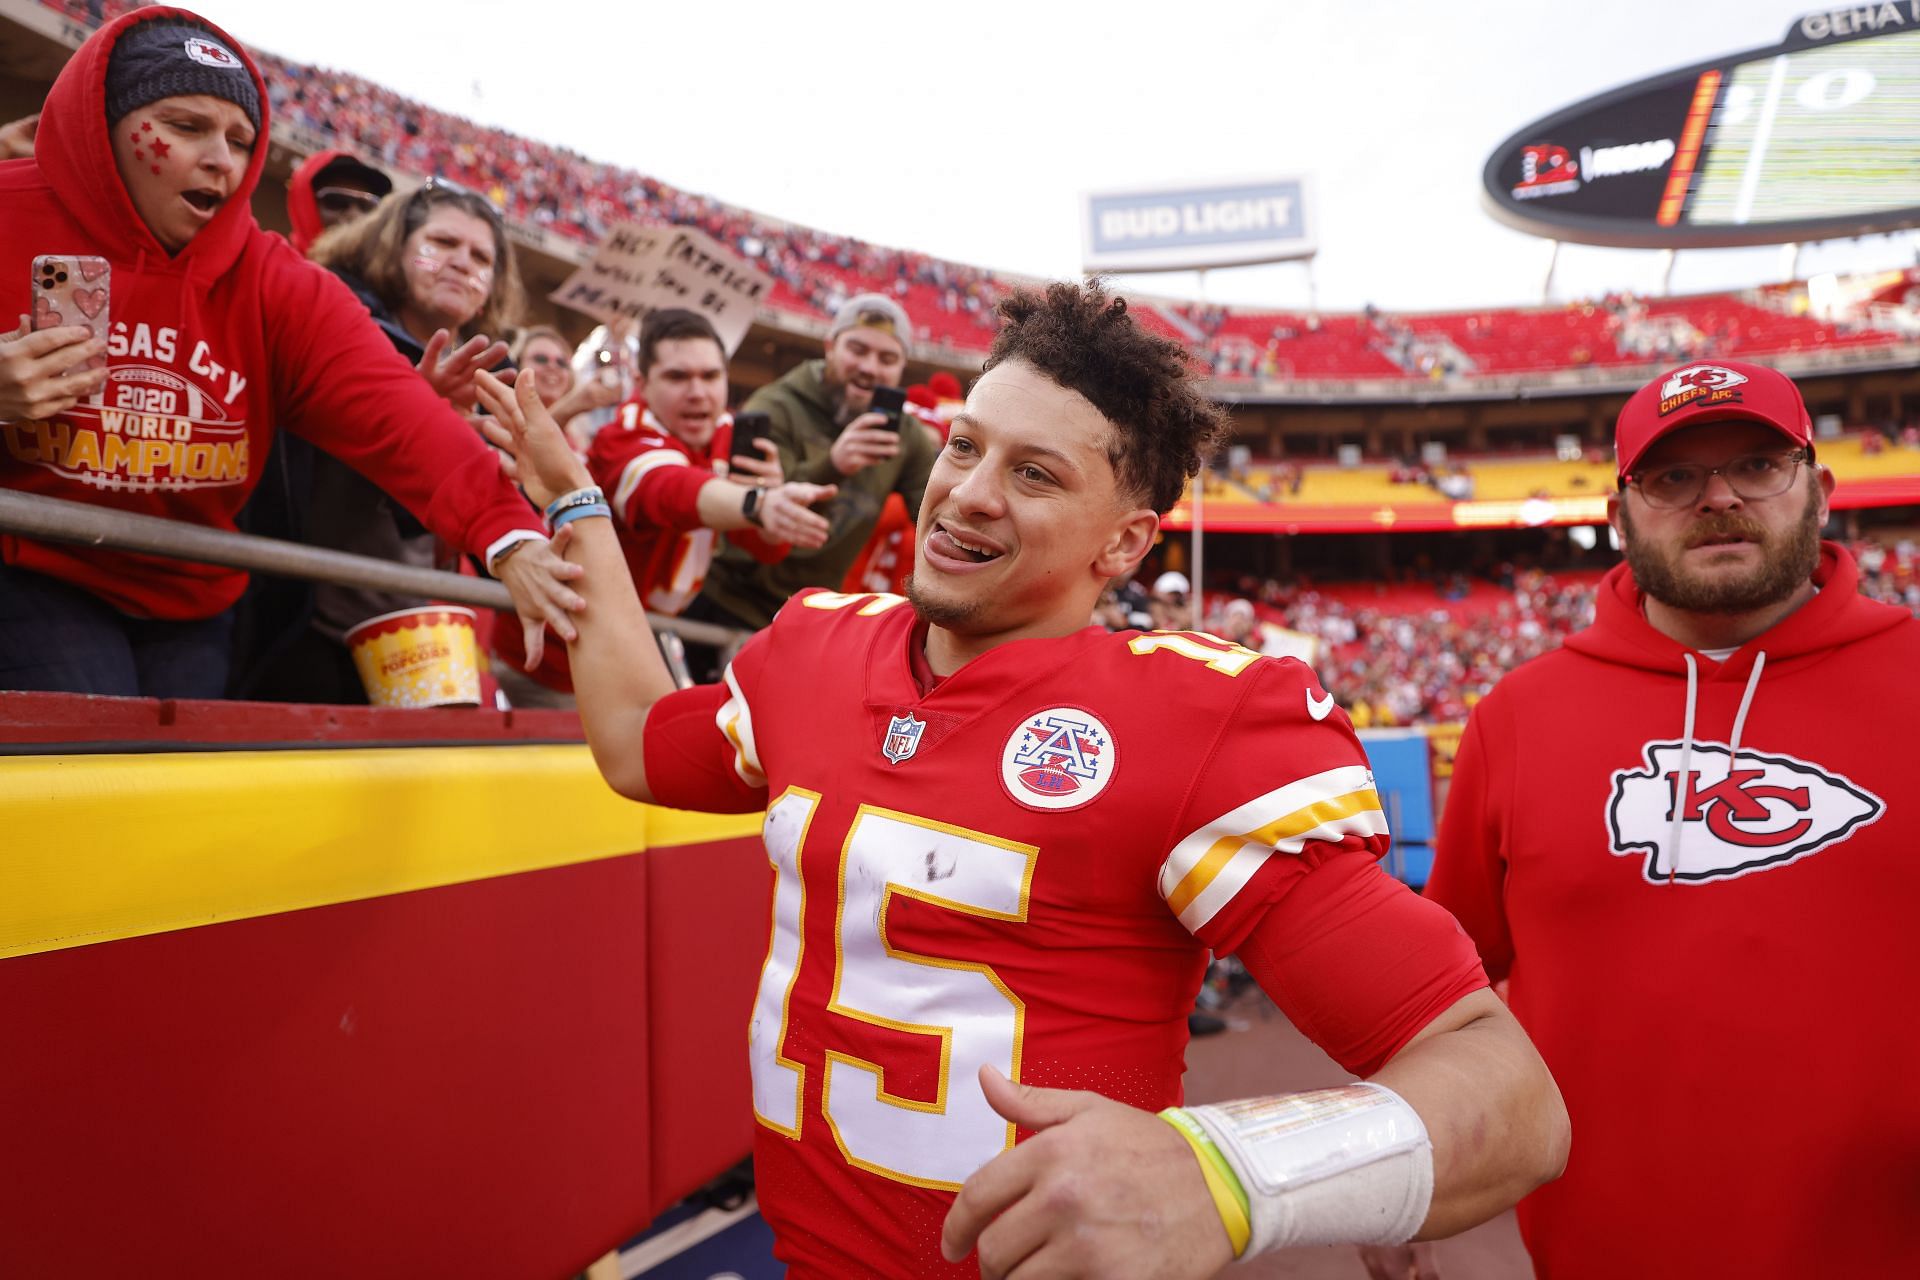 Patrick Mahomes Pays Tribute To His Dad, Patrick Mahomes rolls into  tonight's The Kansas City Chiefs game wearing his dad's New York Mets jersey.  (via NFL), By MLB